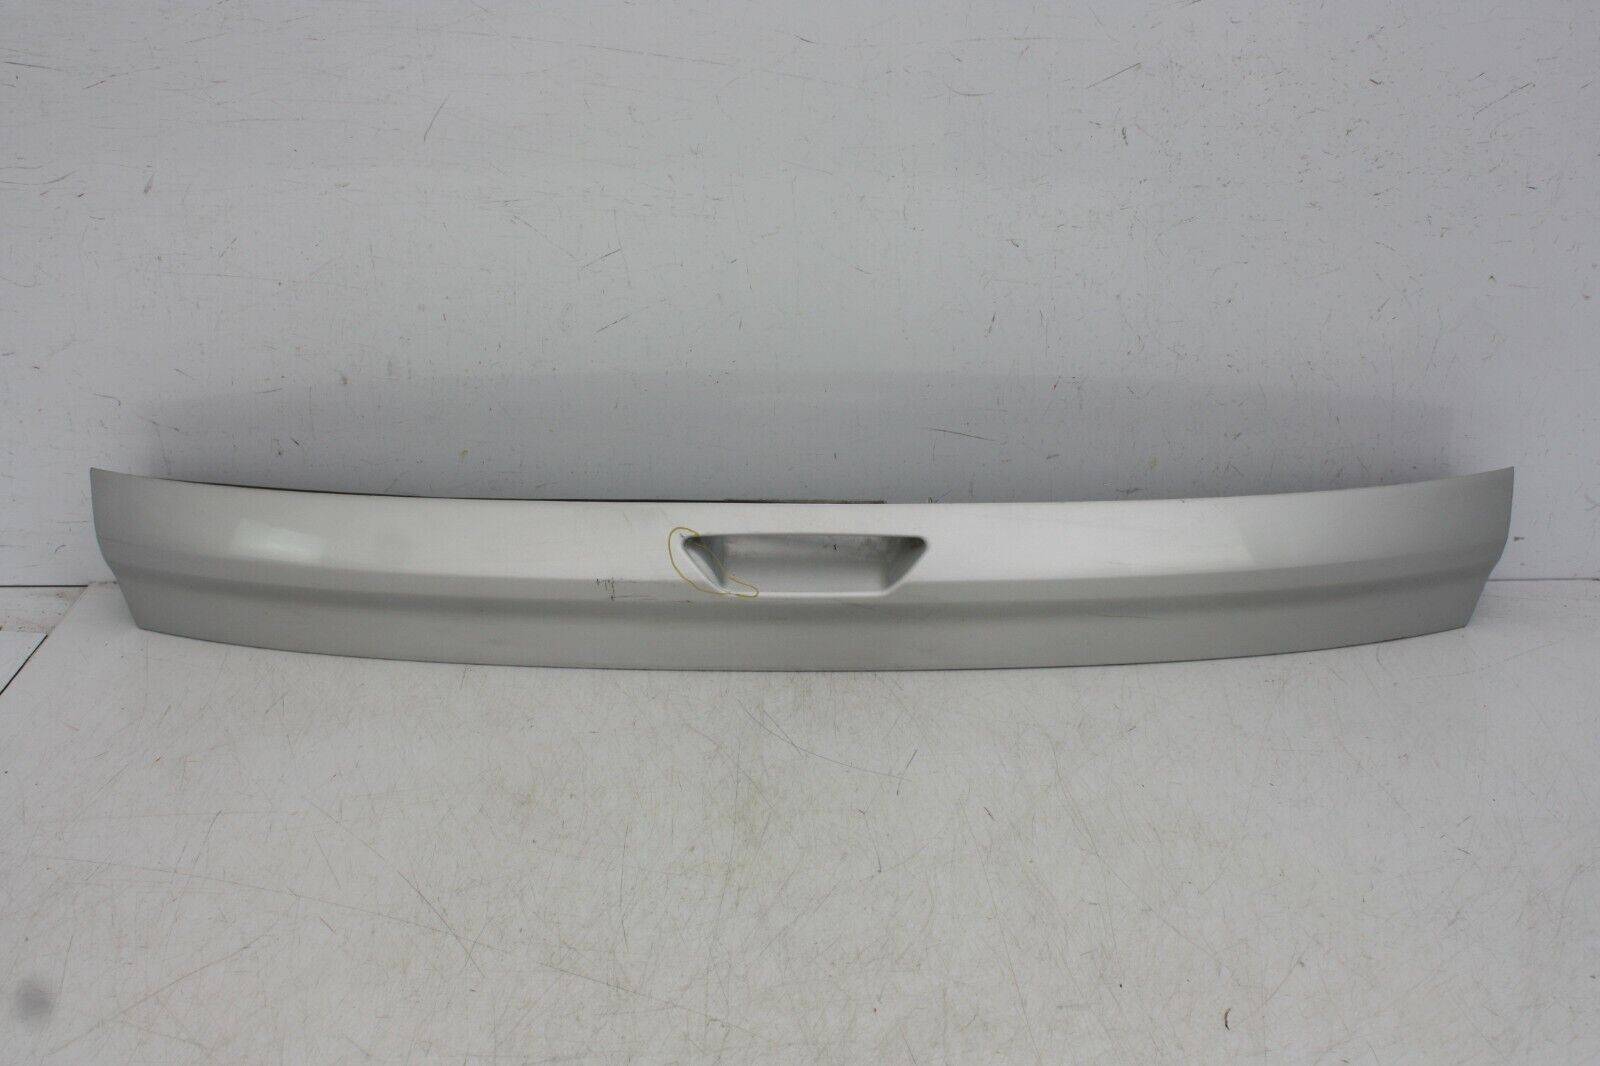 Ford-Kuga-Rear-Tailgate-Boot-Cover-Lower-Section-CJ54-S423A40-A-Genuine-175367544166